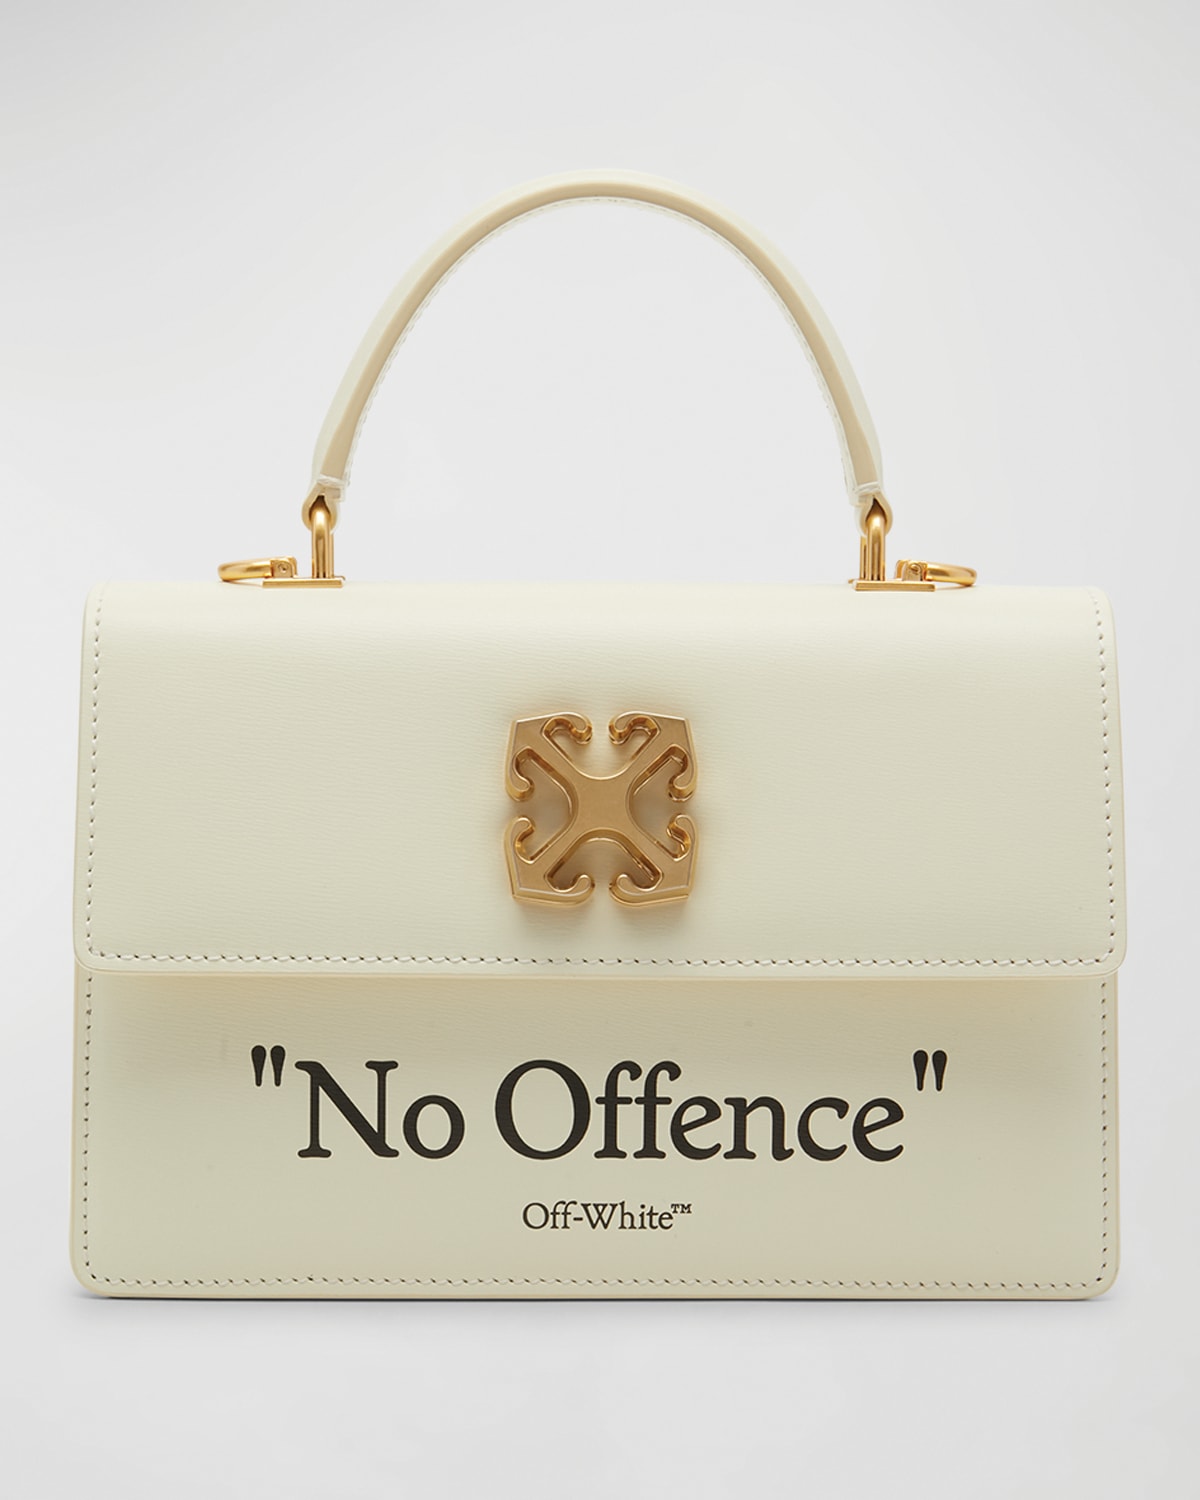 A New Obsession from Off-White: the Jitney Bag